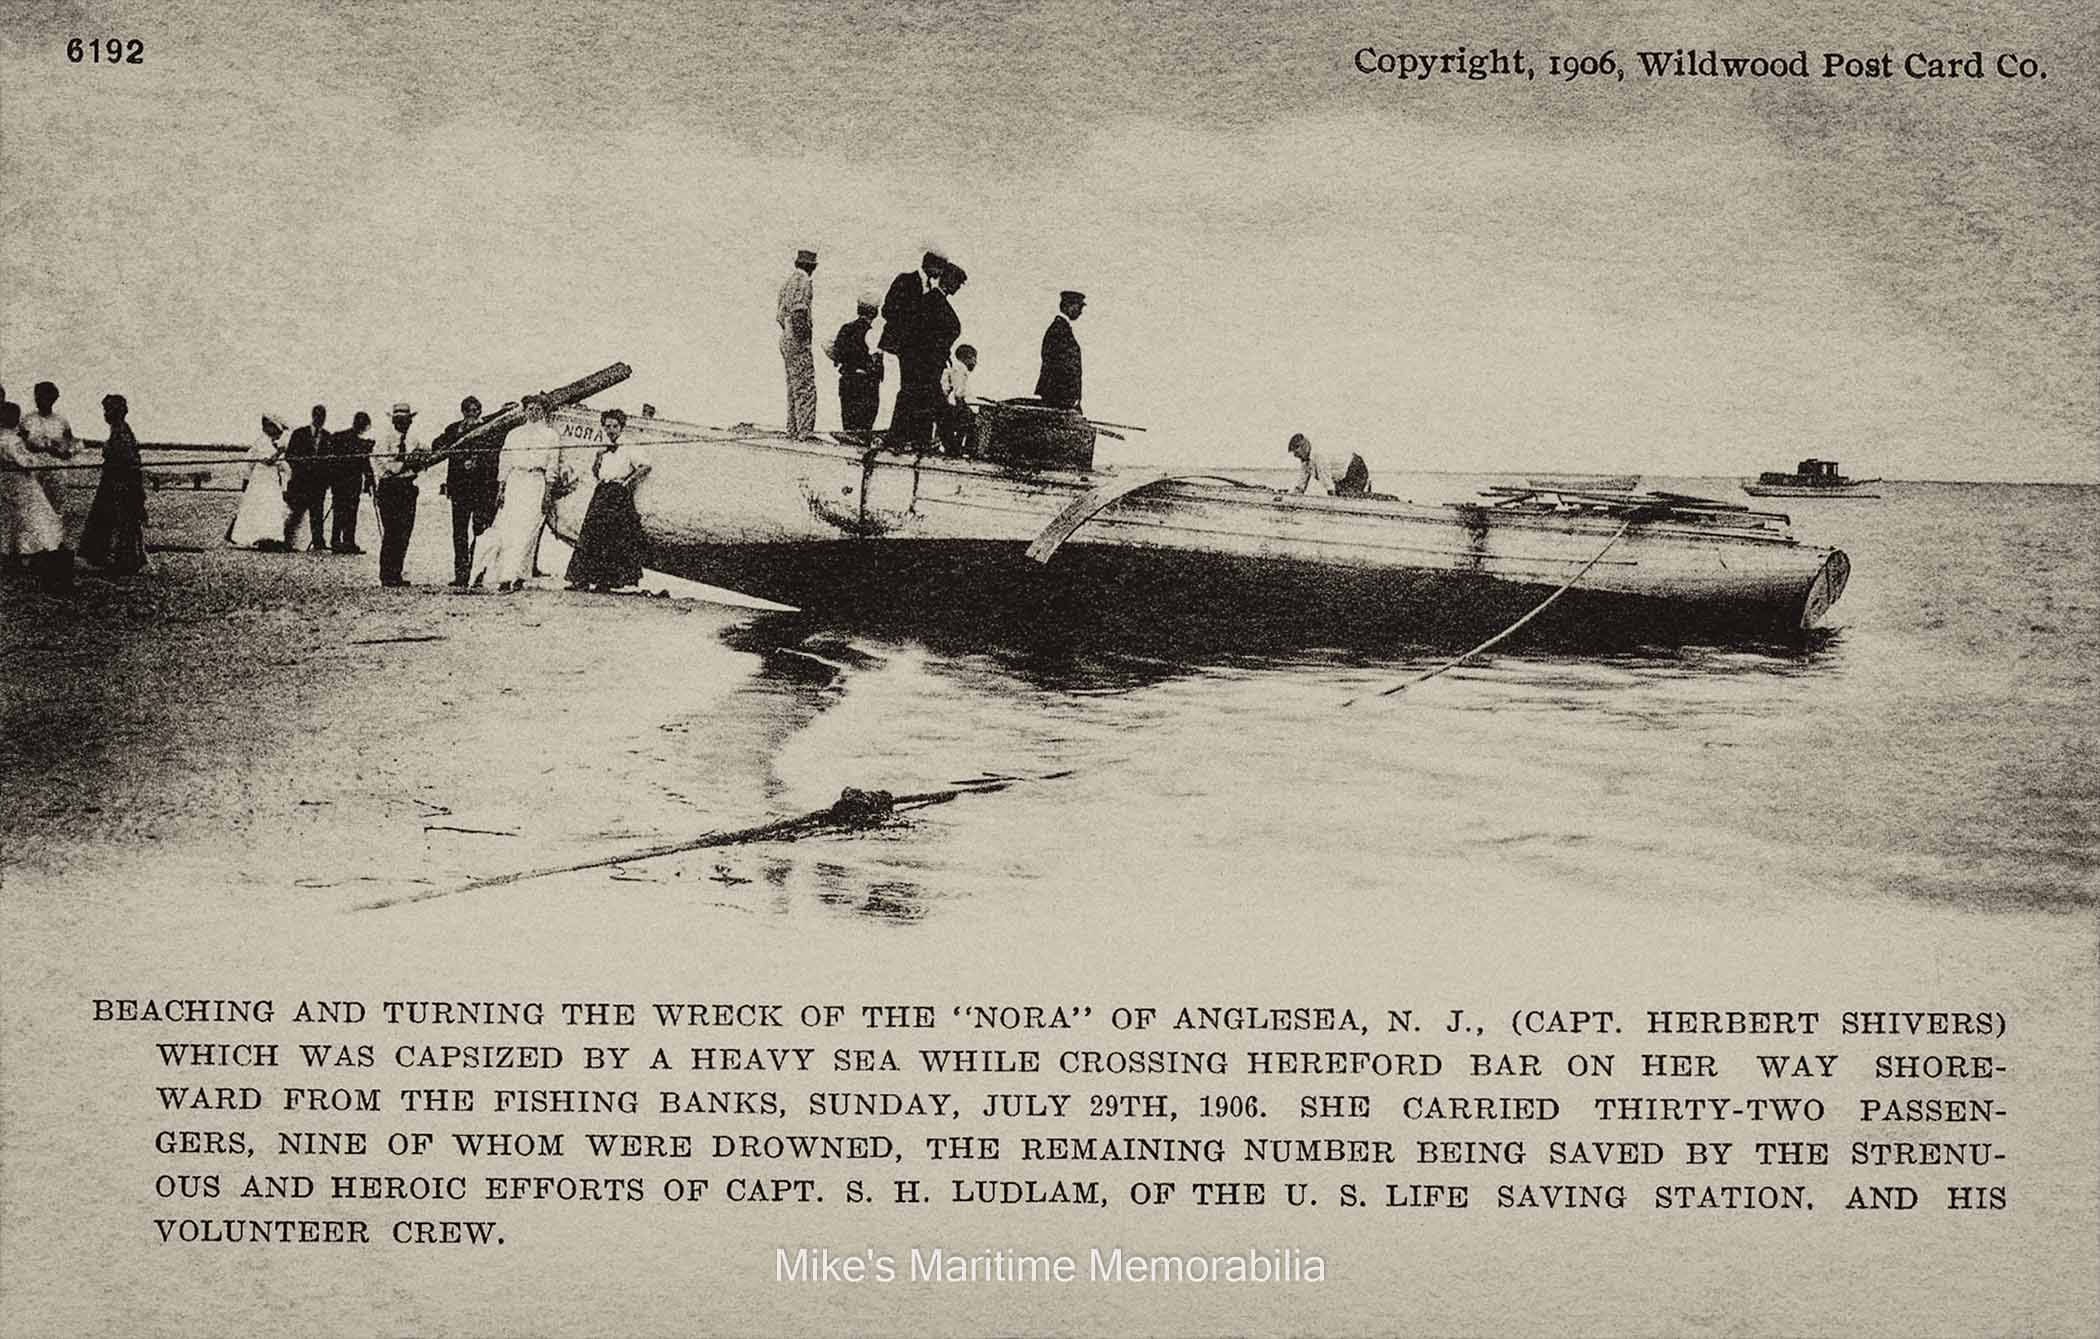 Wreck of the NORA, Anglesea, NJ – 1906 Operated by Captain Herbert Shivers, the "NORA" was a one of several gasoline powered motor sloops that sailed regularly from Anglesea, NJ to the local fishing banks. On July 29, 1906, while returning early from the fishing grounds because of sudden foul weather, she capsized while crossing Hereford Inlet Bar with thirty passengers, two crewmembers and Captain Shivers aboard. Members of the U.S. Life Saving Service station at Hereford Inlet responded to the scene and saved many lives, but despite their efforts, nine of passengers aboard the "NORA" perished. A few hours later on the same day, the motor sloop "ALVA B." also capsized and lost one of her passengers. In 1917, Anglesea became part of the City of North Wildwood, NJ. In 1915, the U.S. Life Saving Service joined with the U.S. Revenue Cutter Service (the oldest armed maritime service in the U.S.) to form the U.S. Coast Guard.